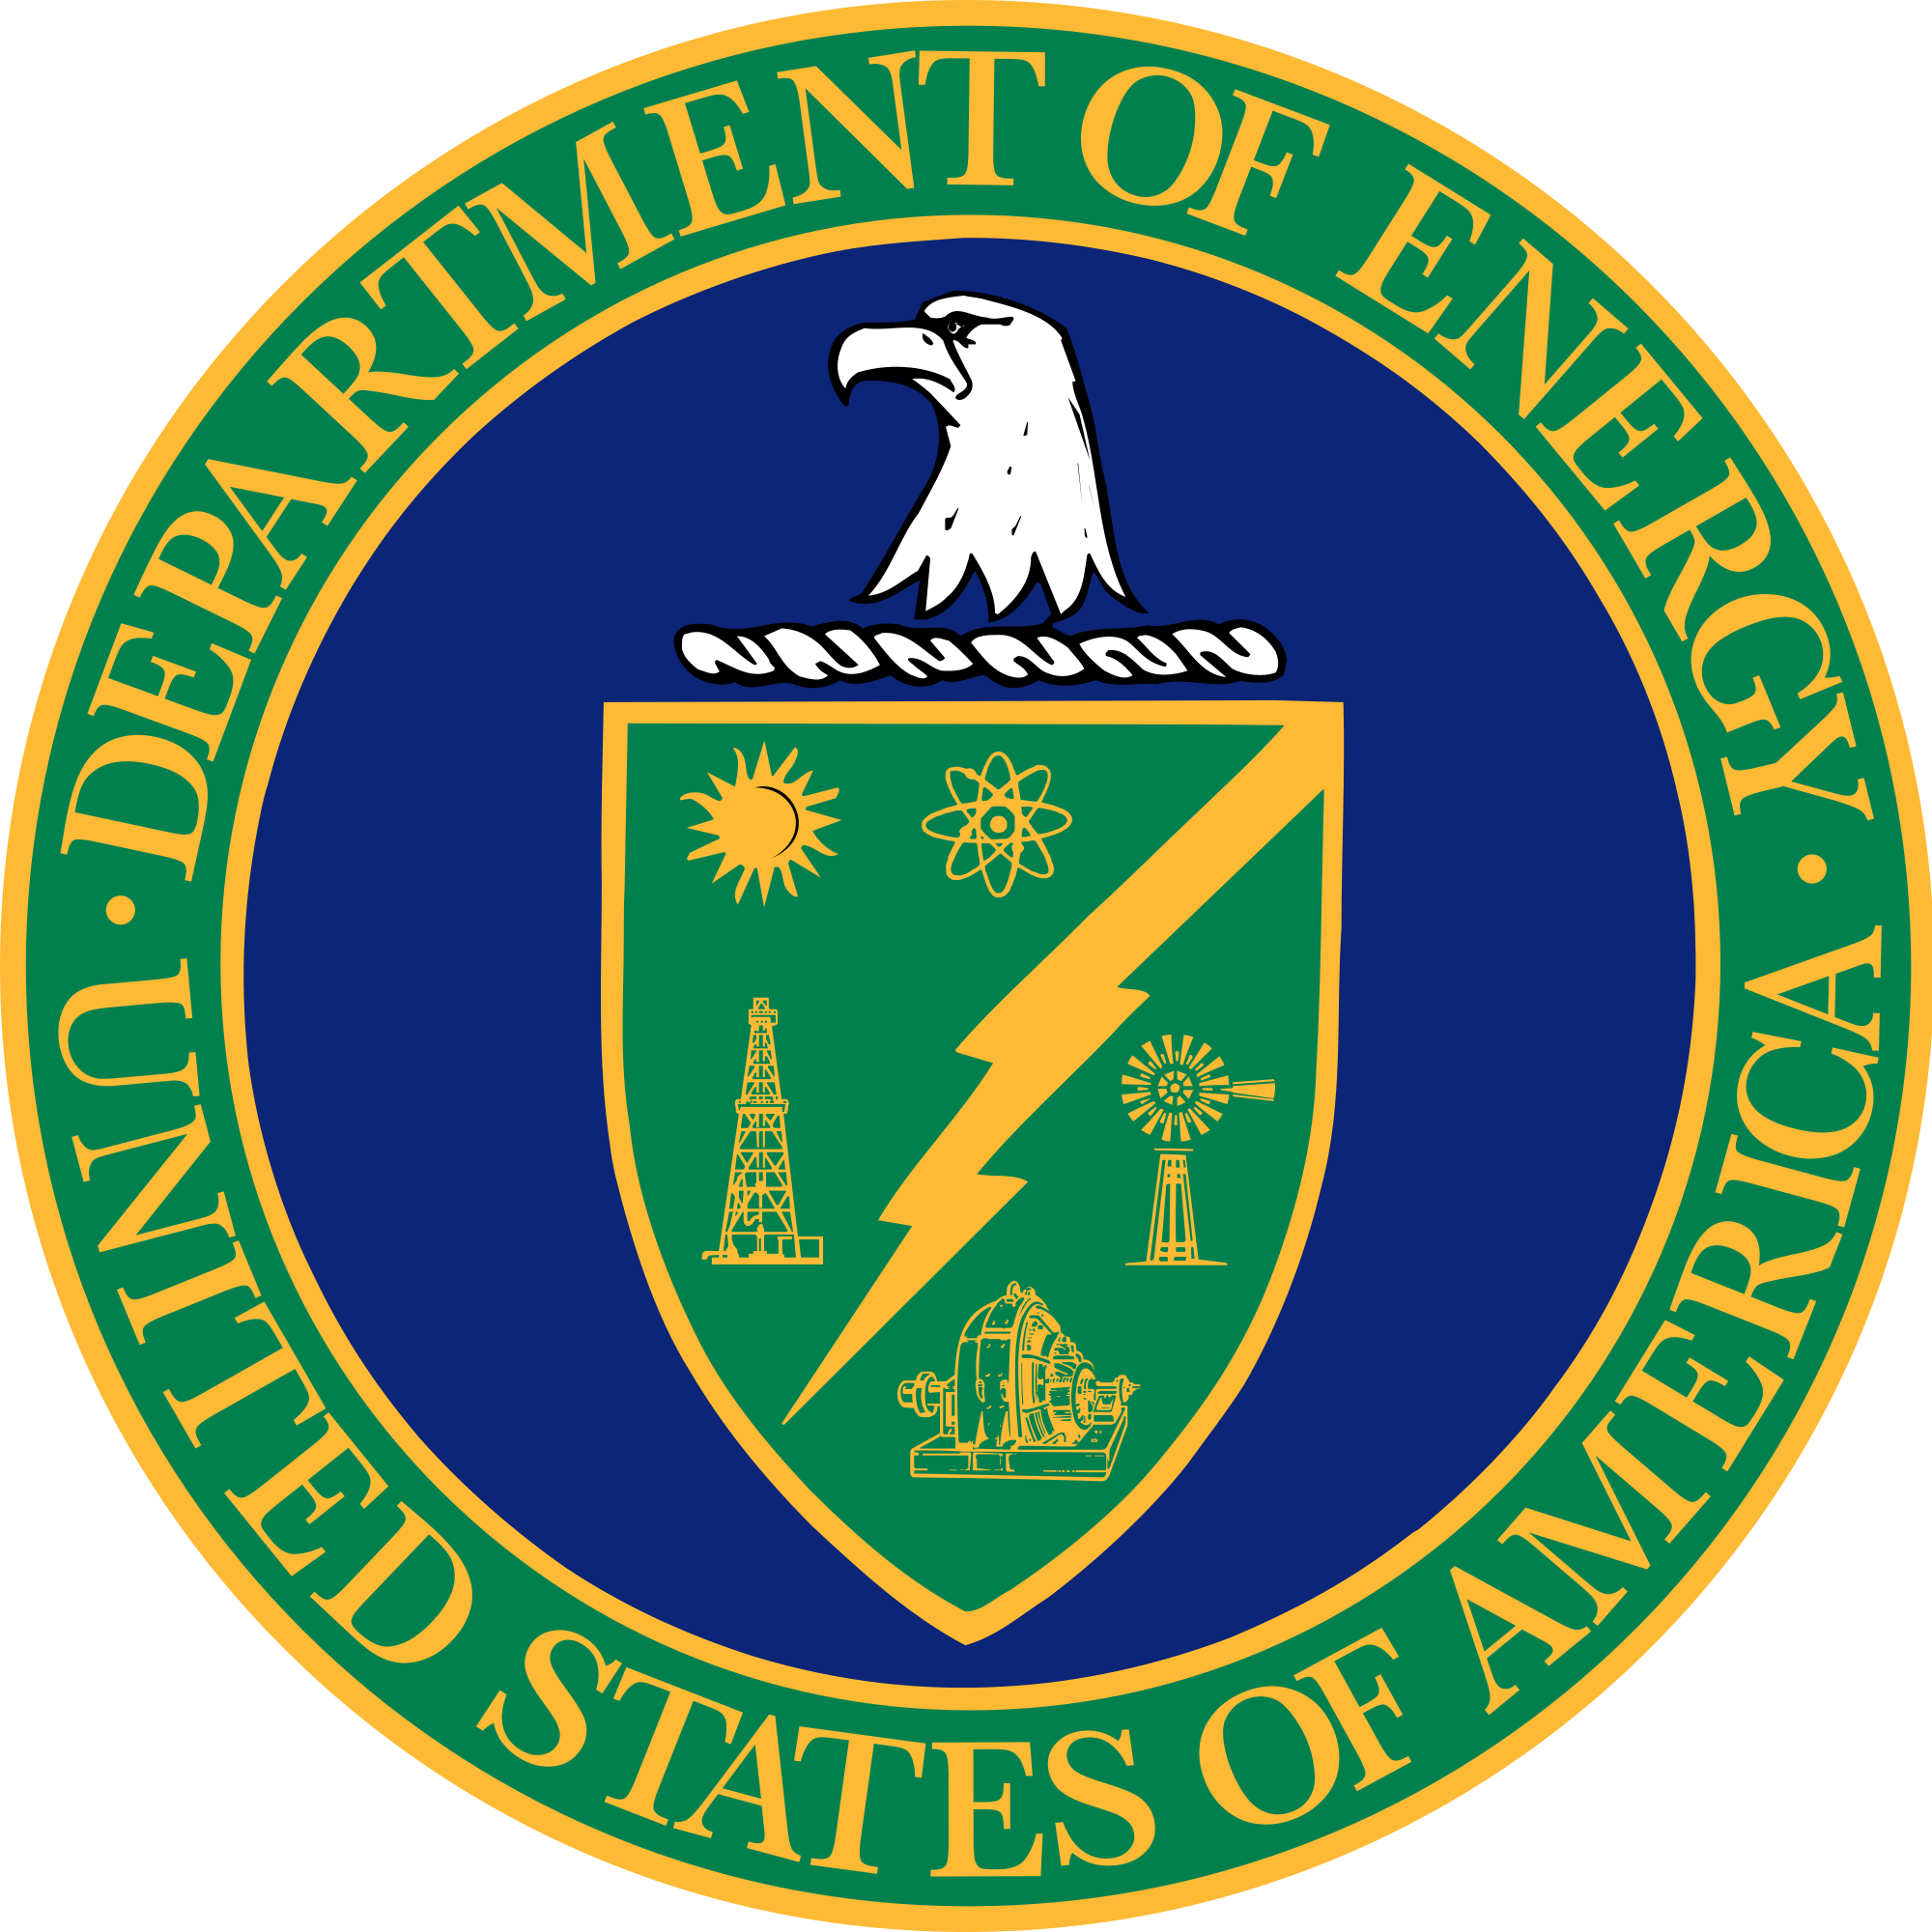 2000px-Seal_of_the_United_States_Department_of_Energy.svg